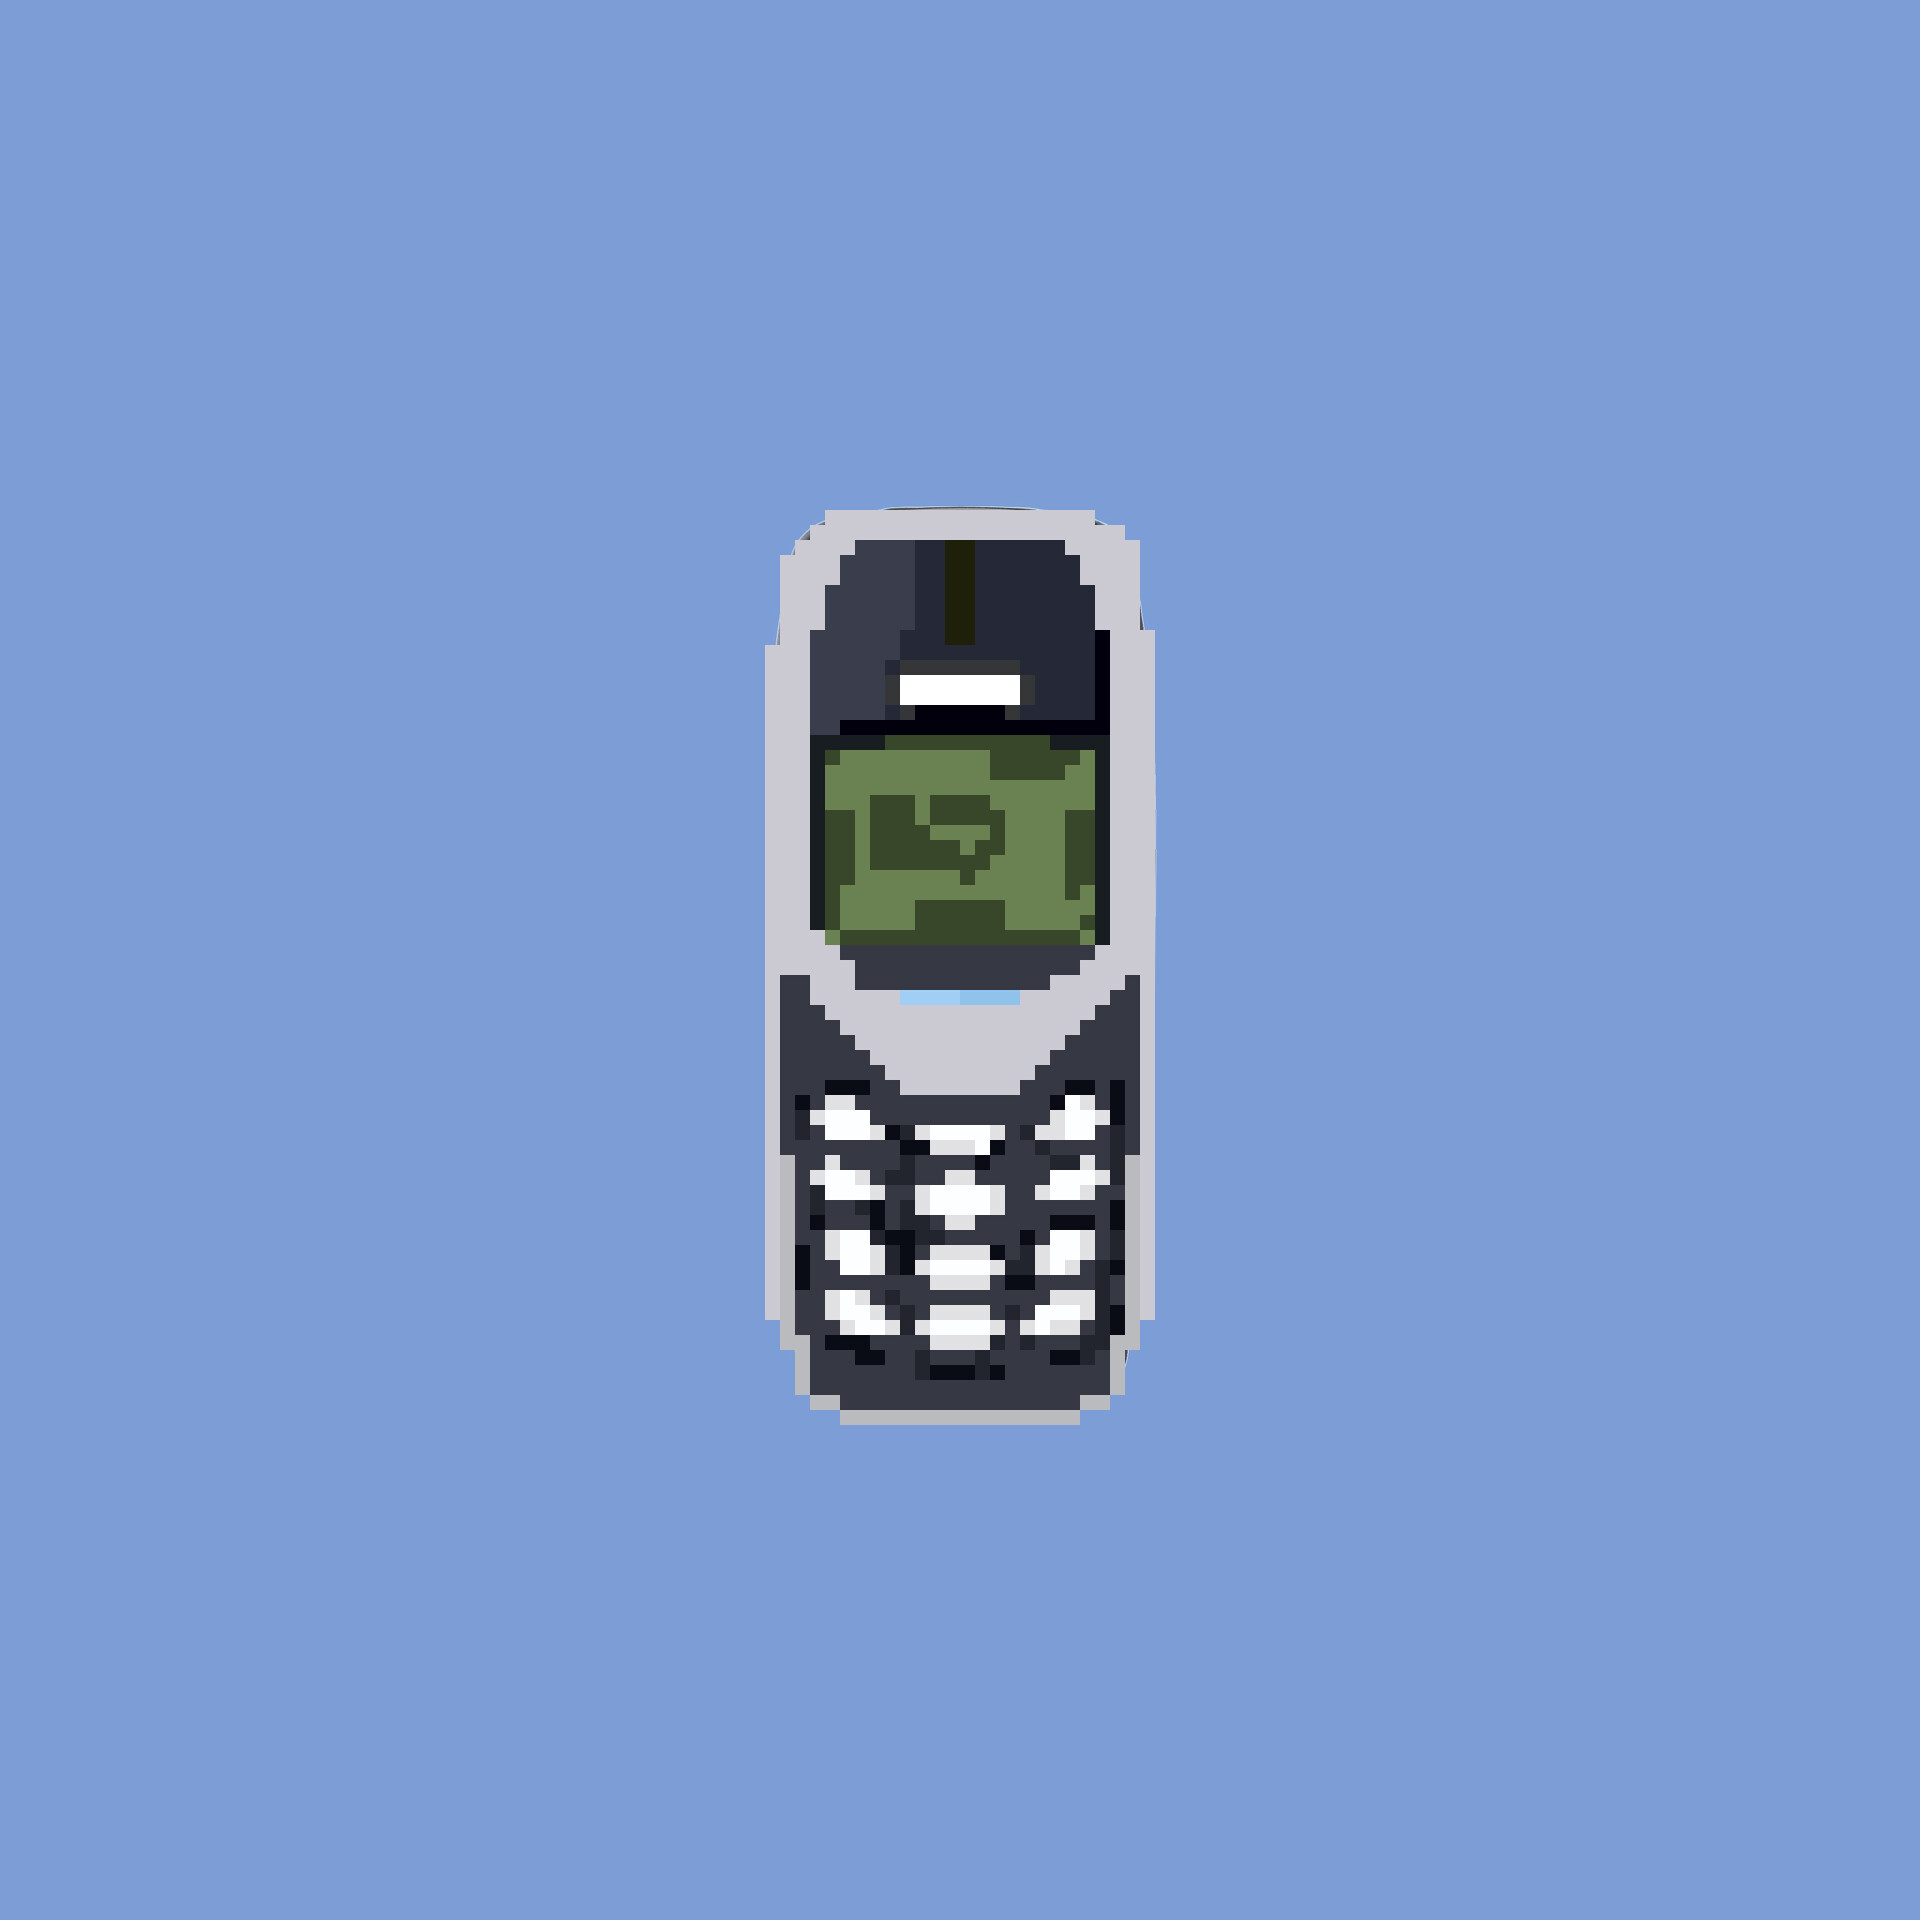 Nokia 3310 3G Architecture  Places Wallpapers